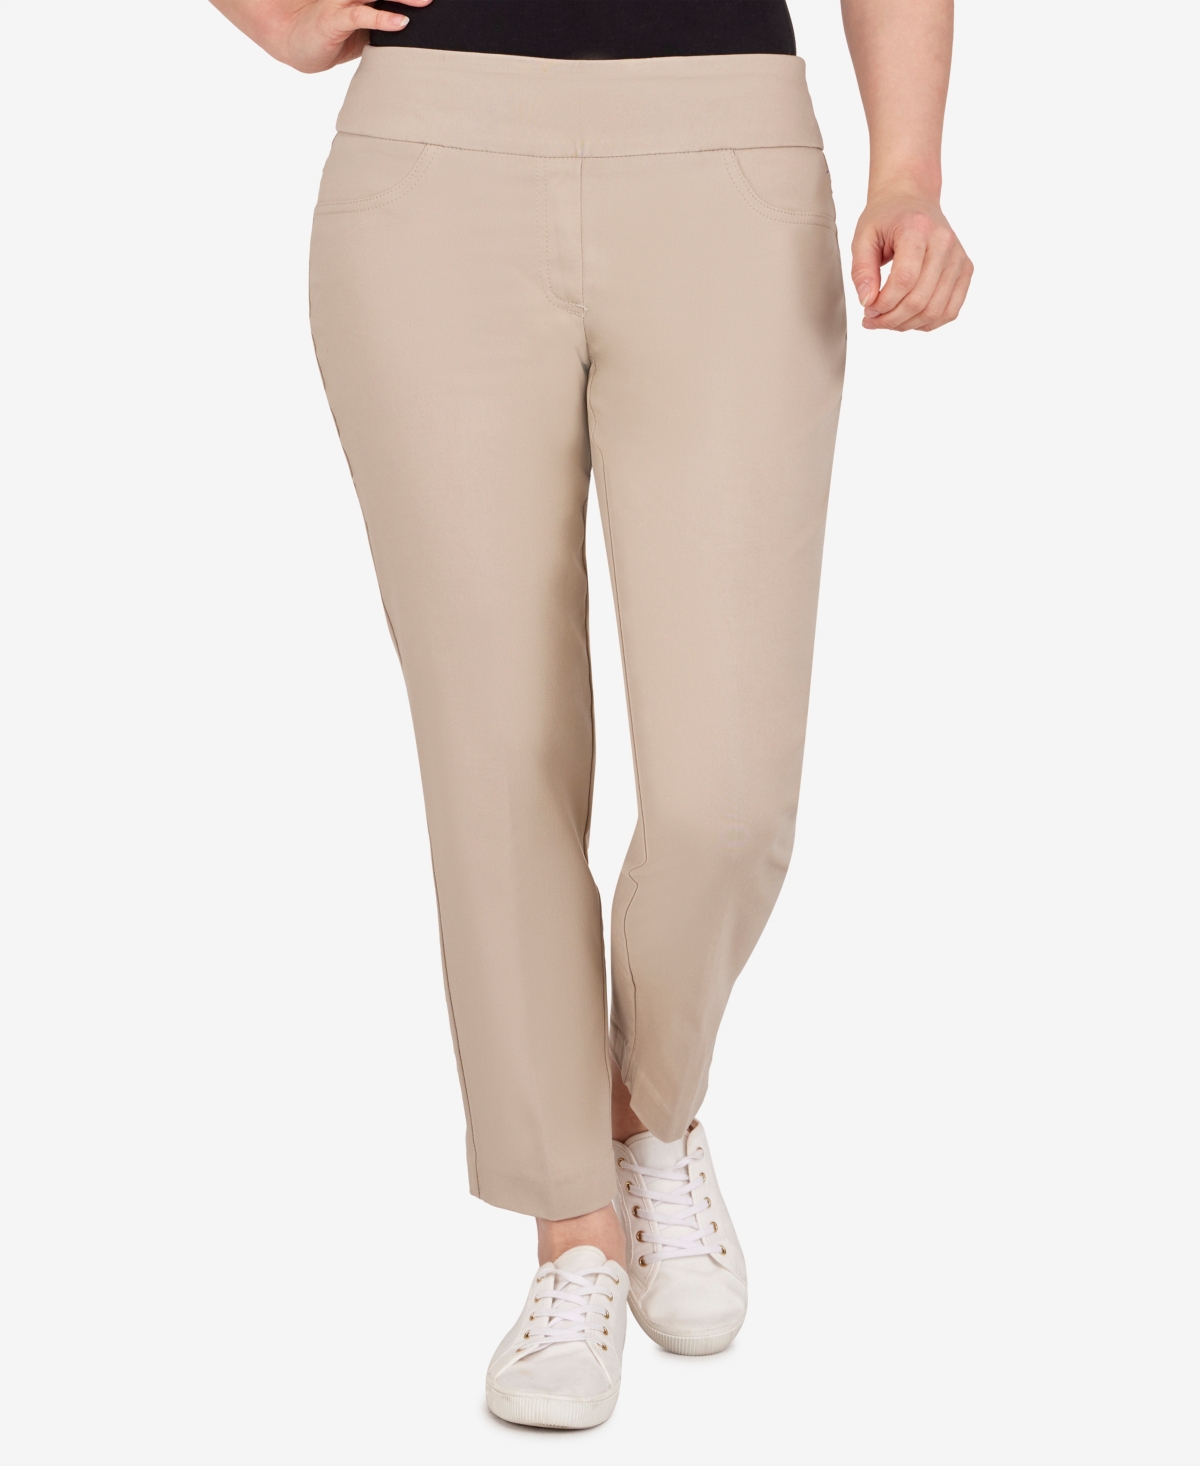 Ruby Rd. Petite Mid-rise Pull-on Straight Solar Millennium Tech Ankle Pants In Chino